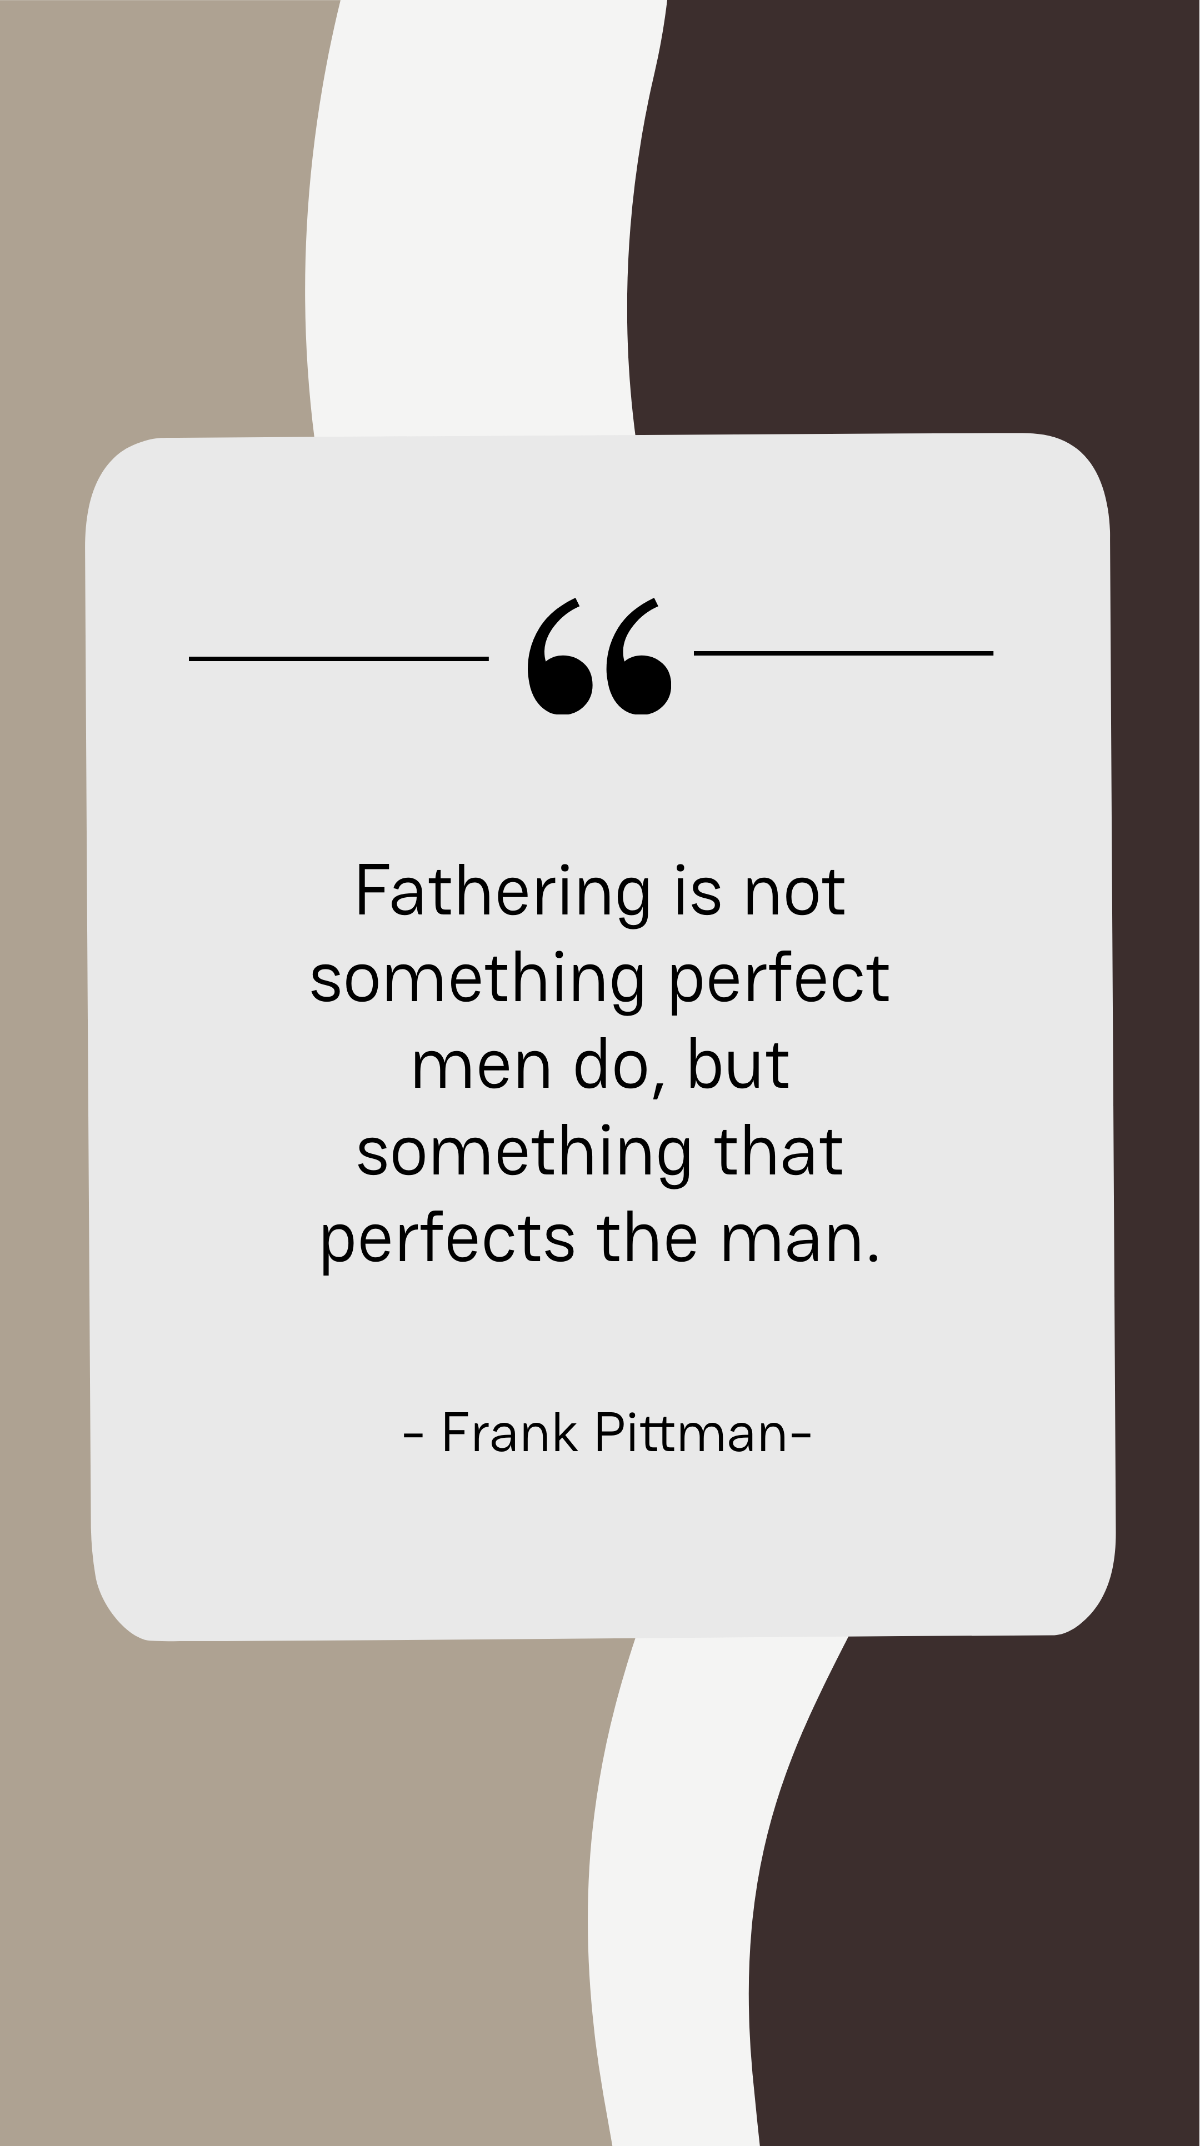 Frank Pittman - Fathering is not something perfect men do, but something that perfects the man. Template